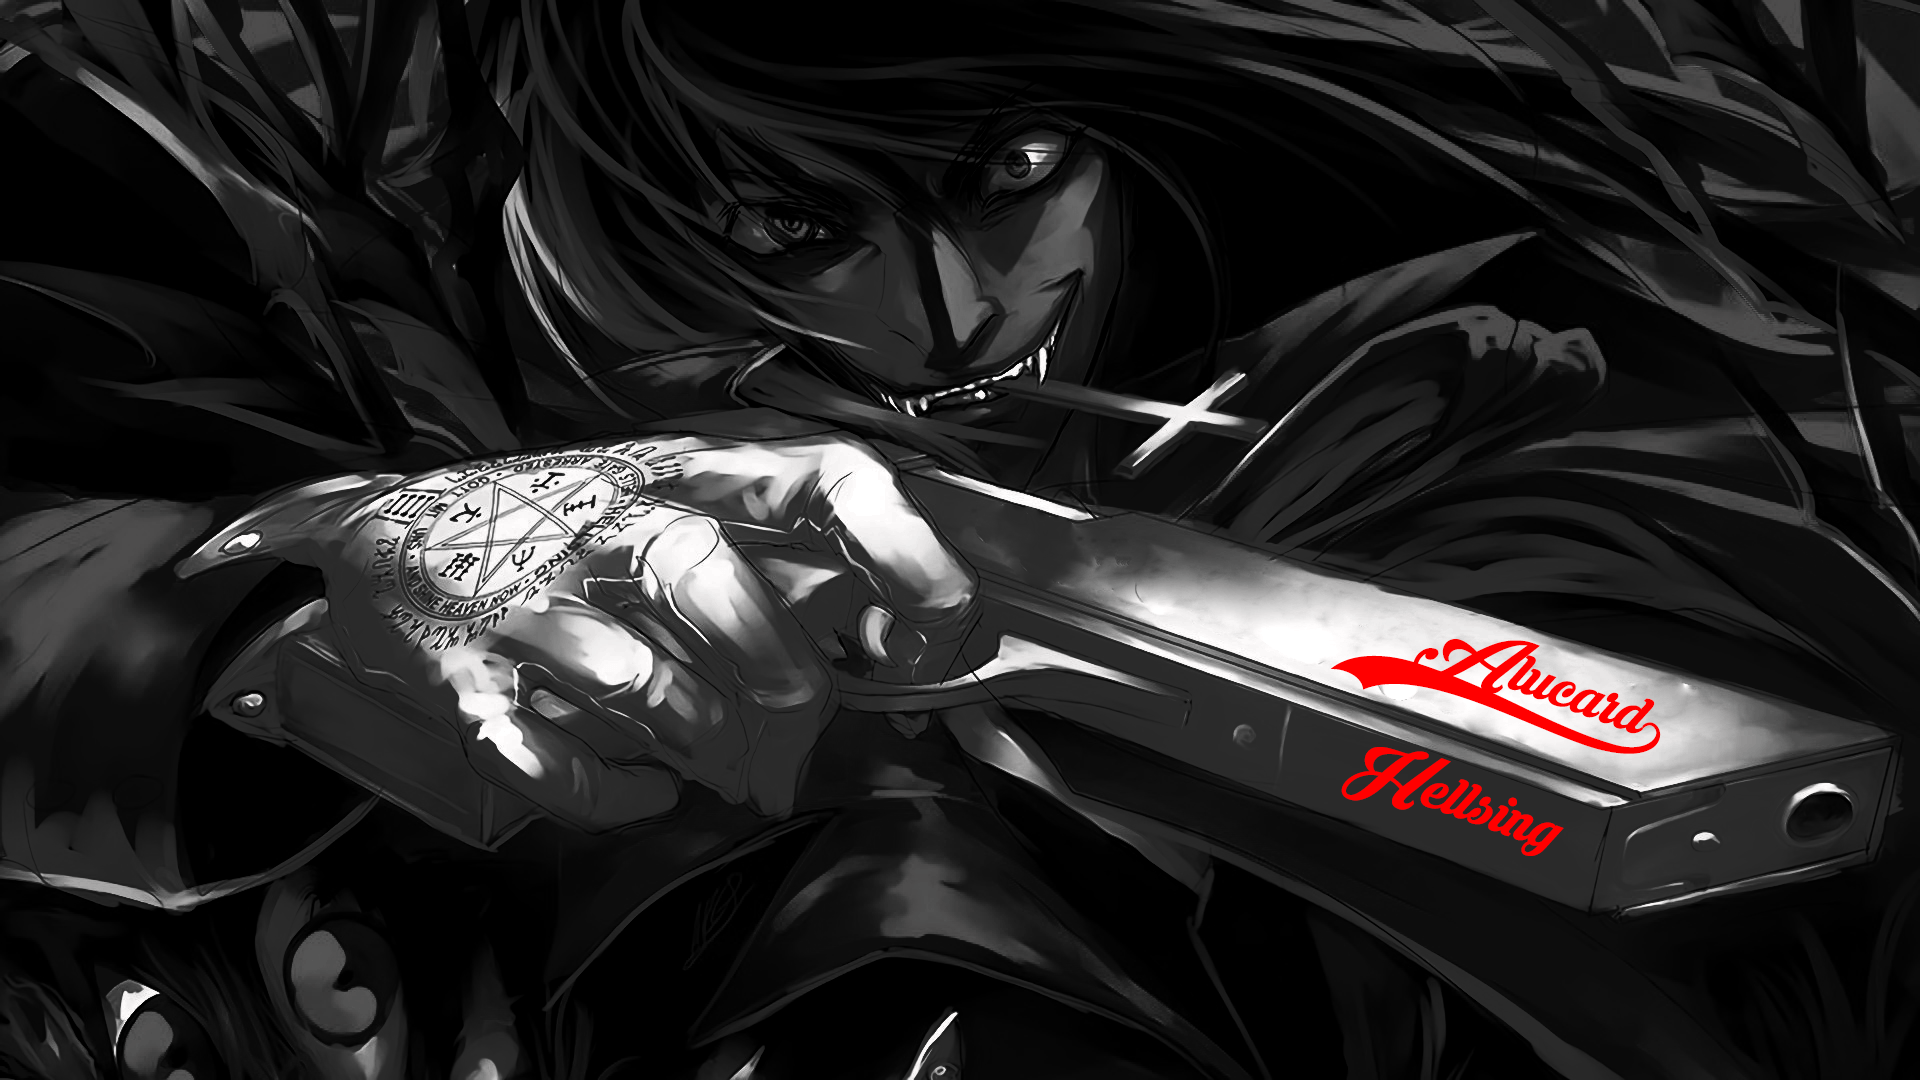 Black Anime Wallpaper 71 Pictures Anime Wallpaper 1920x1080 Anime Images